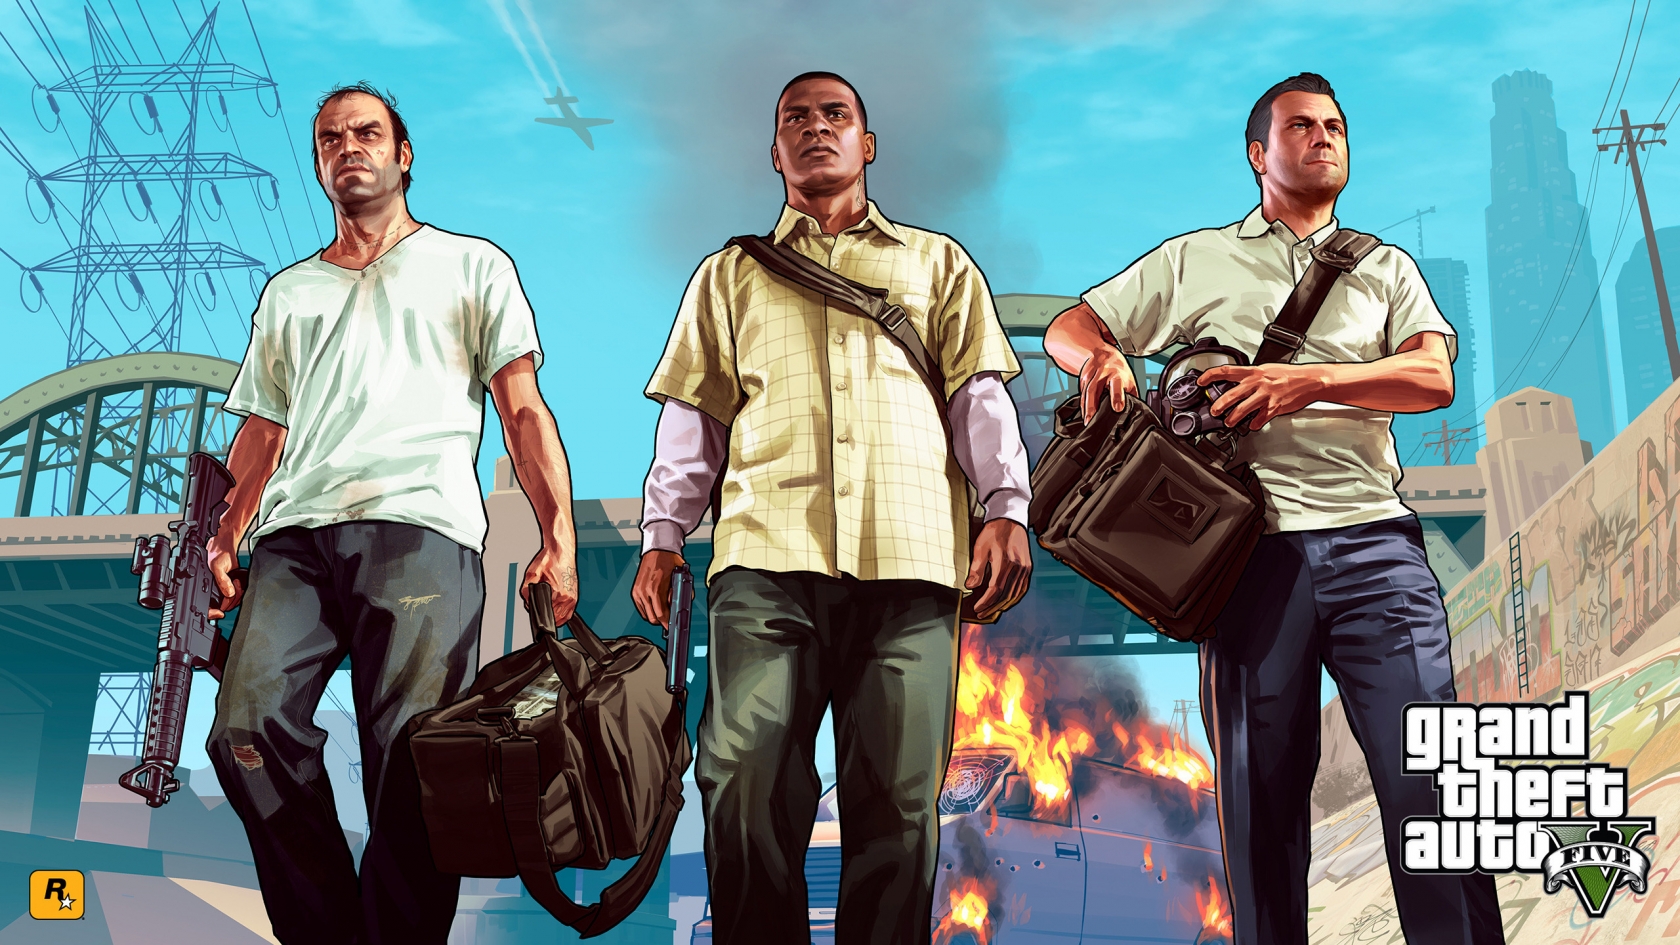 Gta 5 Main Characters for 1680 x 945 HDTV resolution